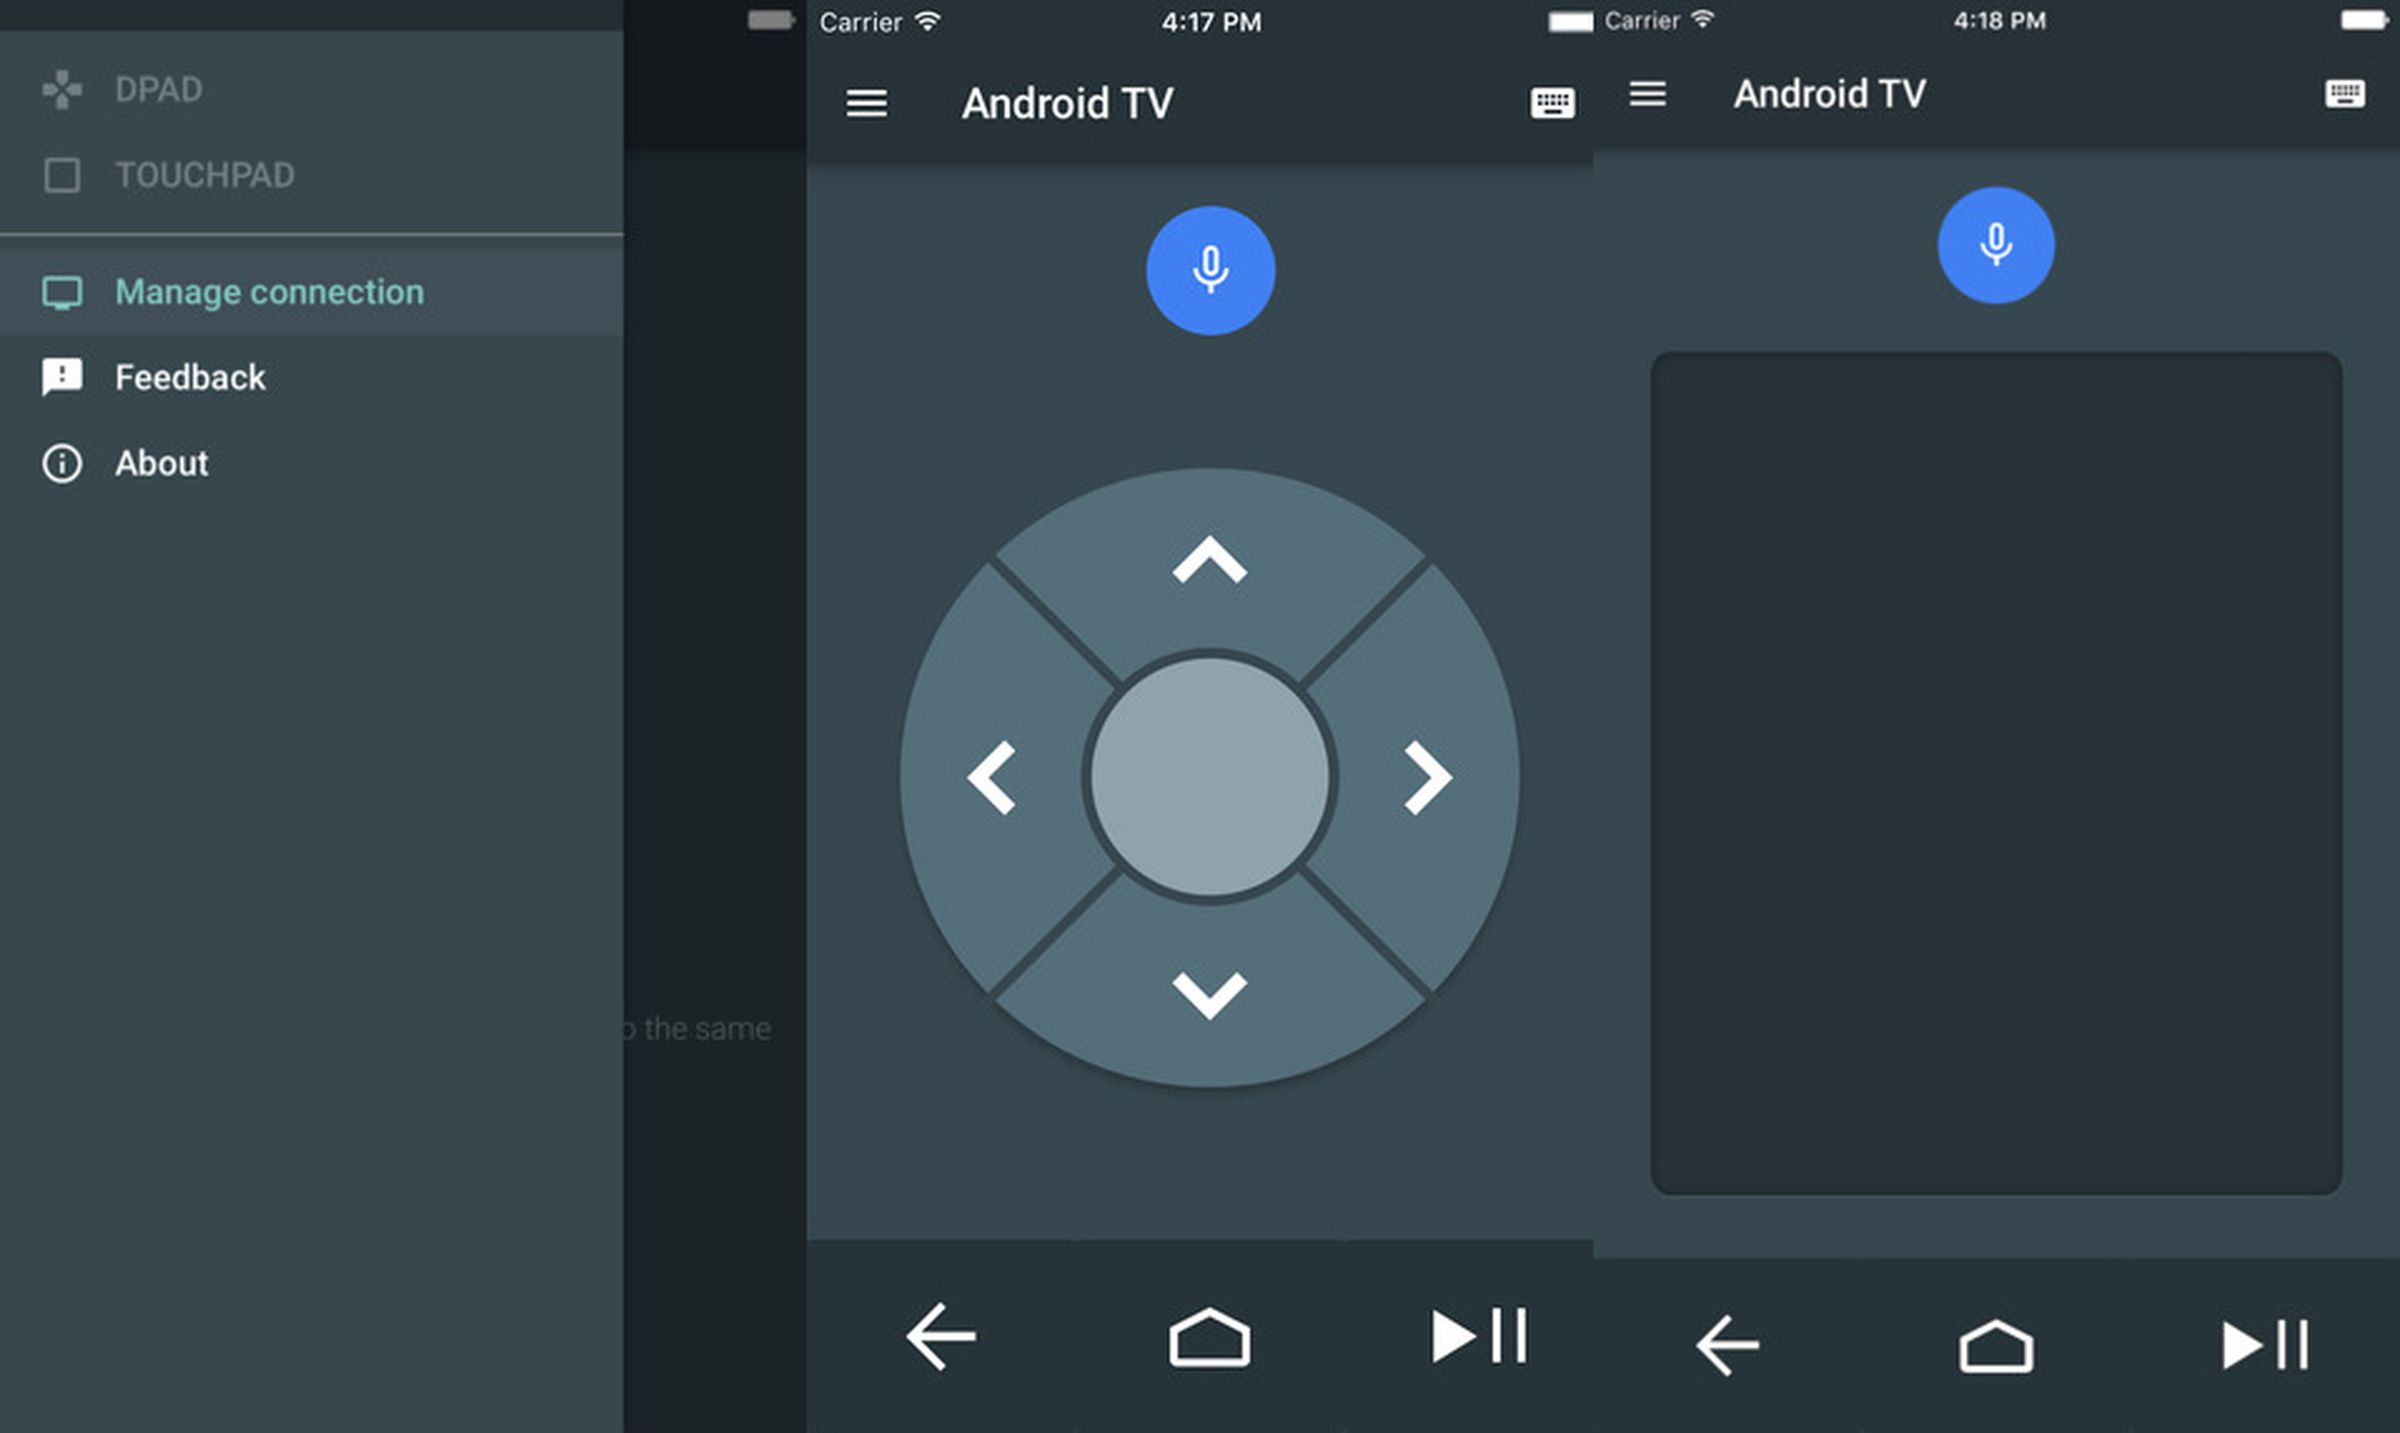 Android TV app